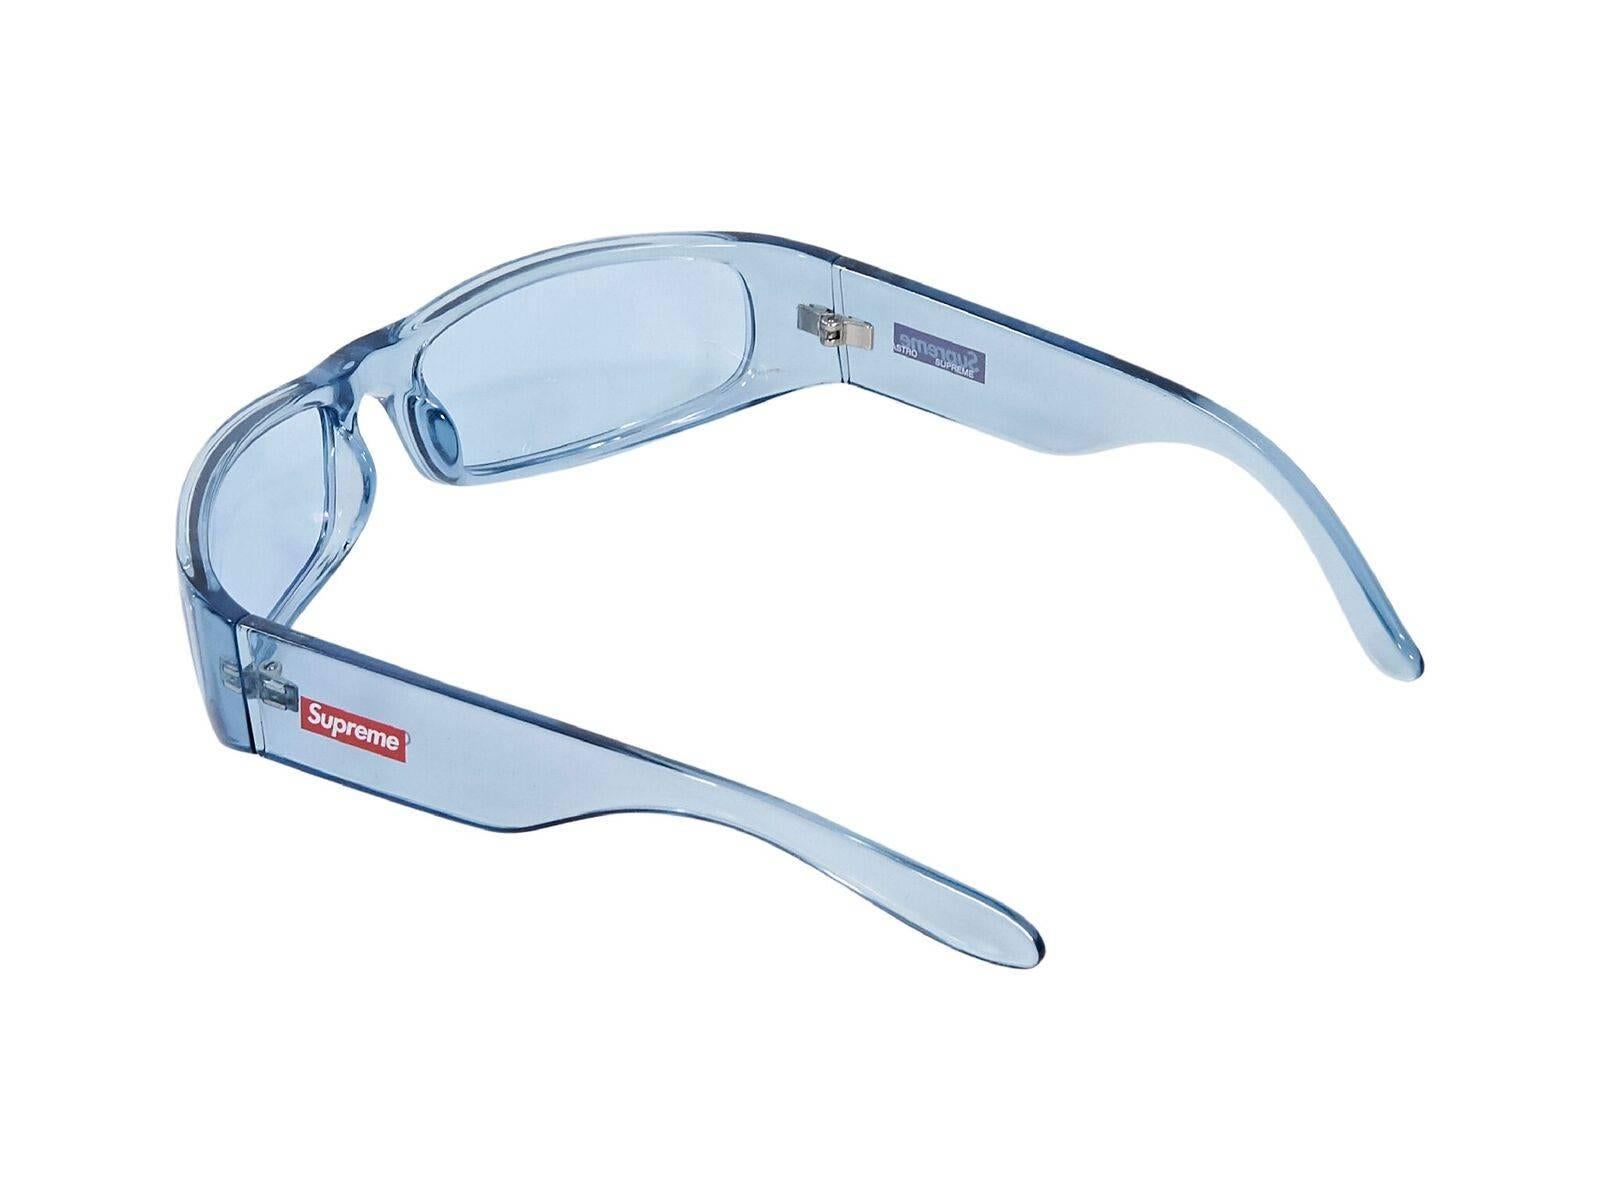 Product details:  Light blue Astro sunglasses by Supreme.  Case included.  2.5